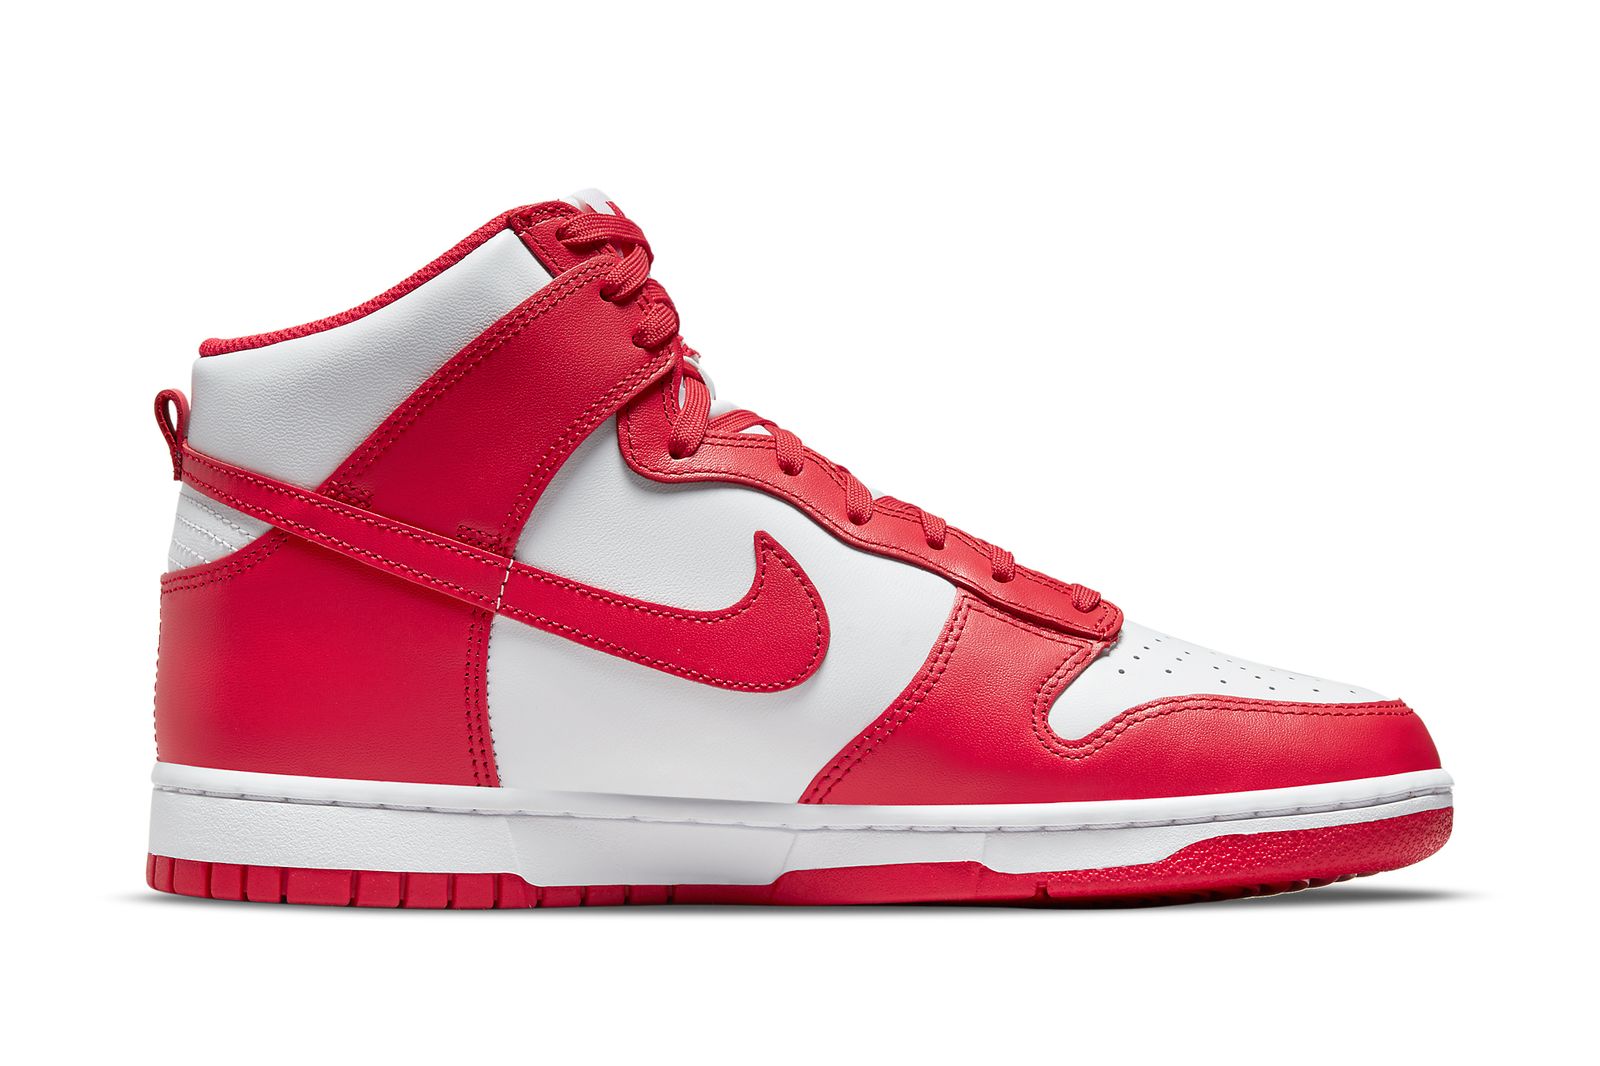 The Nike Dunk High 'University Red' Drops This Month - Sneaker Freaker